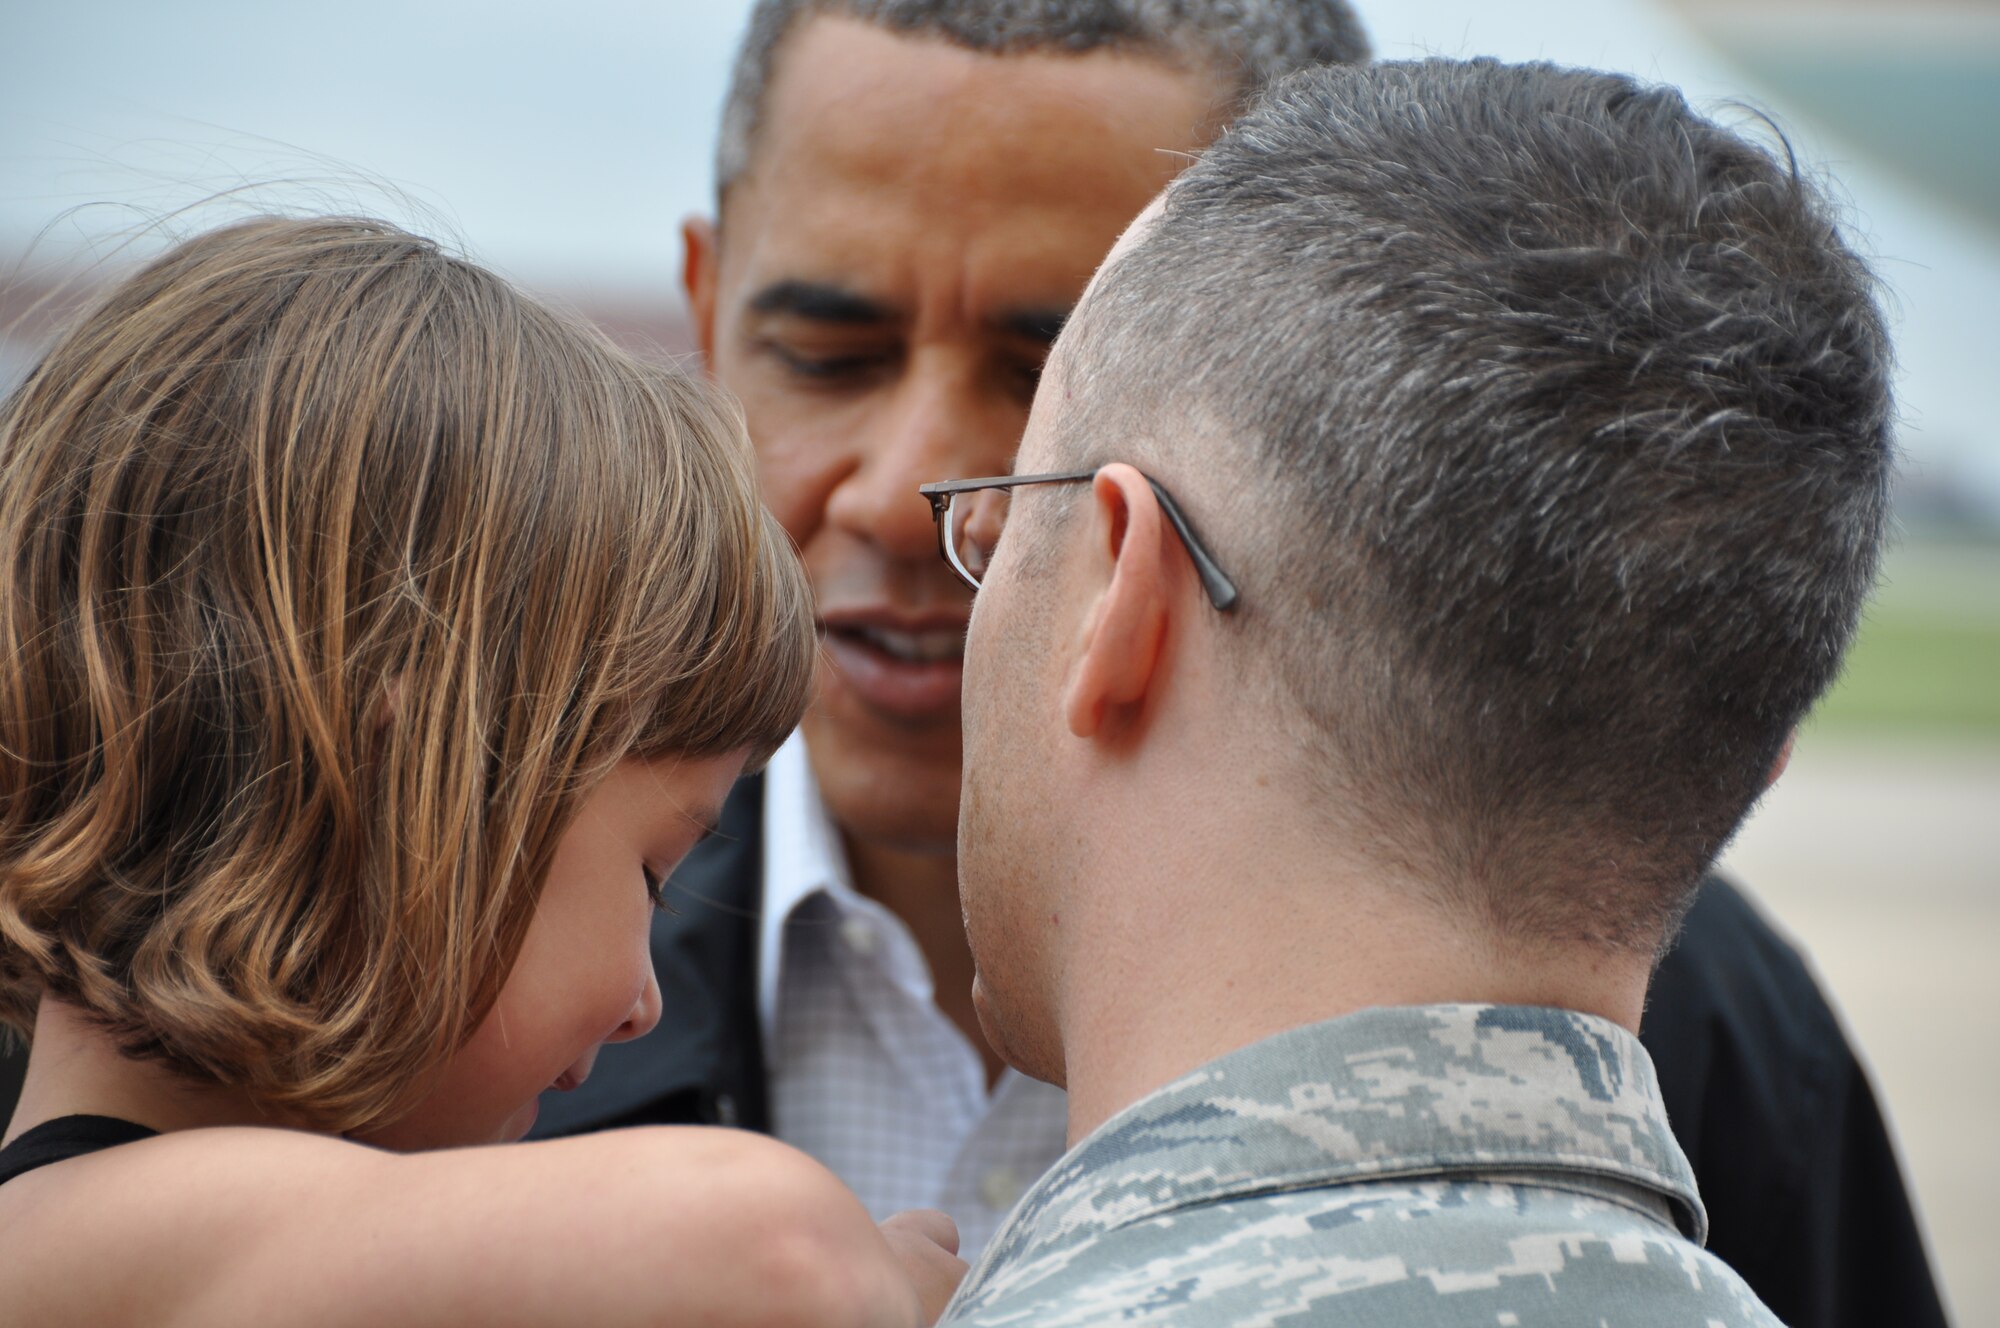 TINKER AIR FORCE BASE, Okla.--President Barack Obama greets Capt. Russell
Ramsey and the family affected by the tornado here, May 26. Team Tinker members effected by the EF-5 Tornado that hit Moore Okla. and first responders, met with the president on the flight line before he traveled to Moore to see the devastation first hand.  (U.S. Air Force Photo by Maj. Jon Quinlan)
